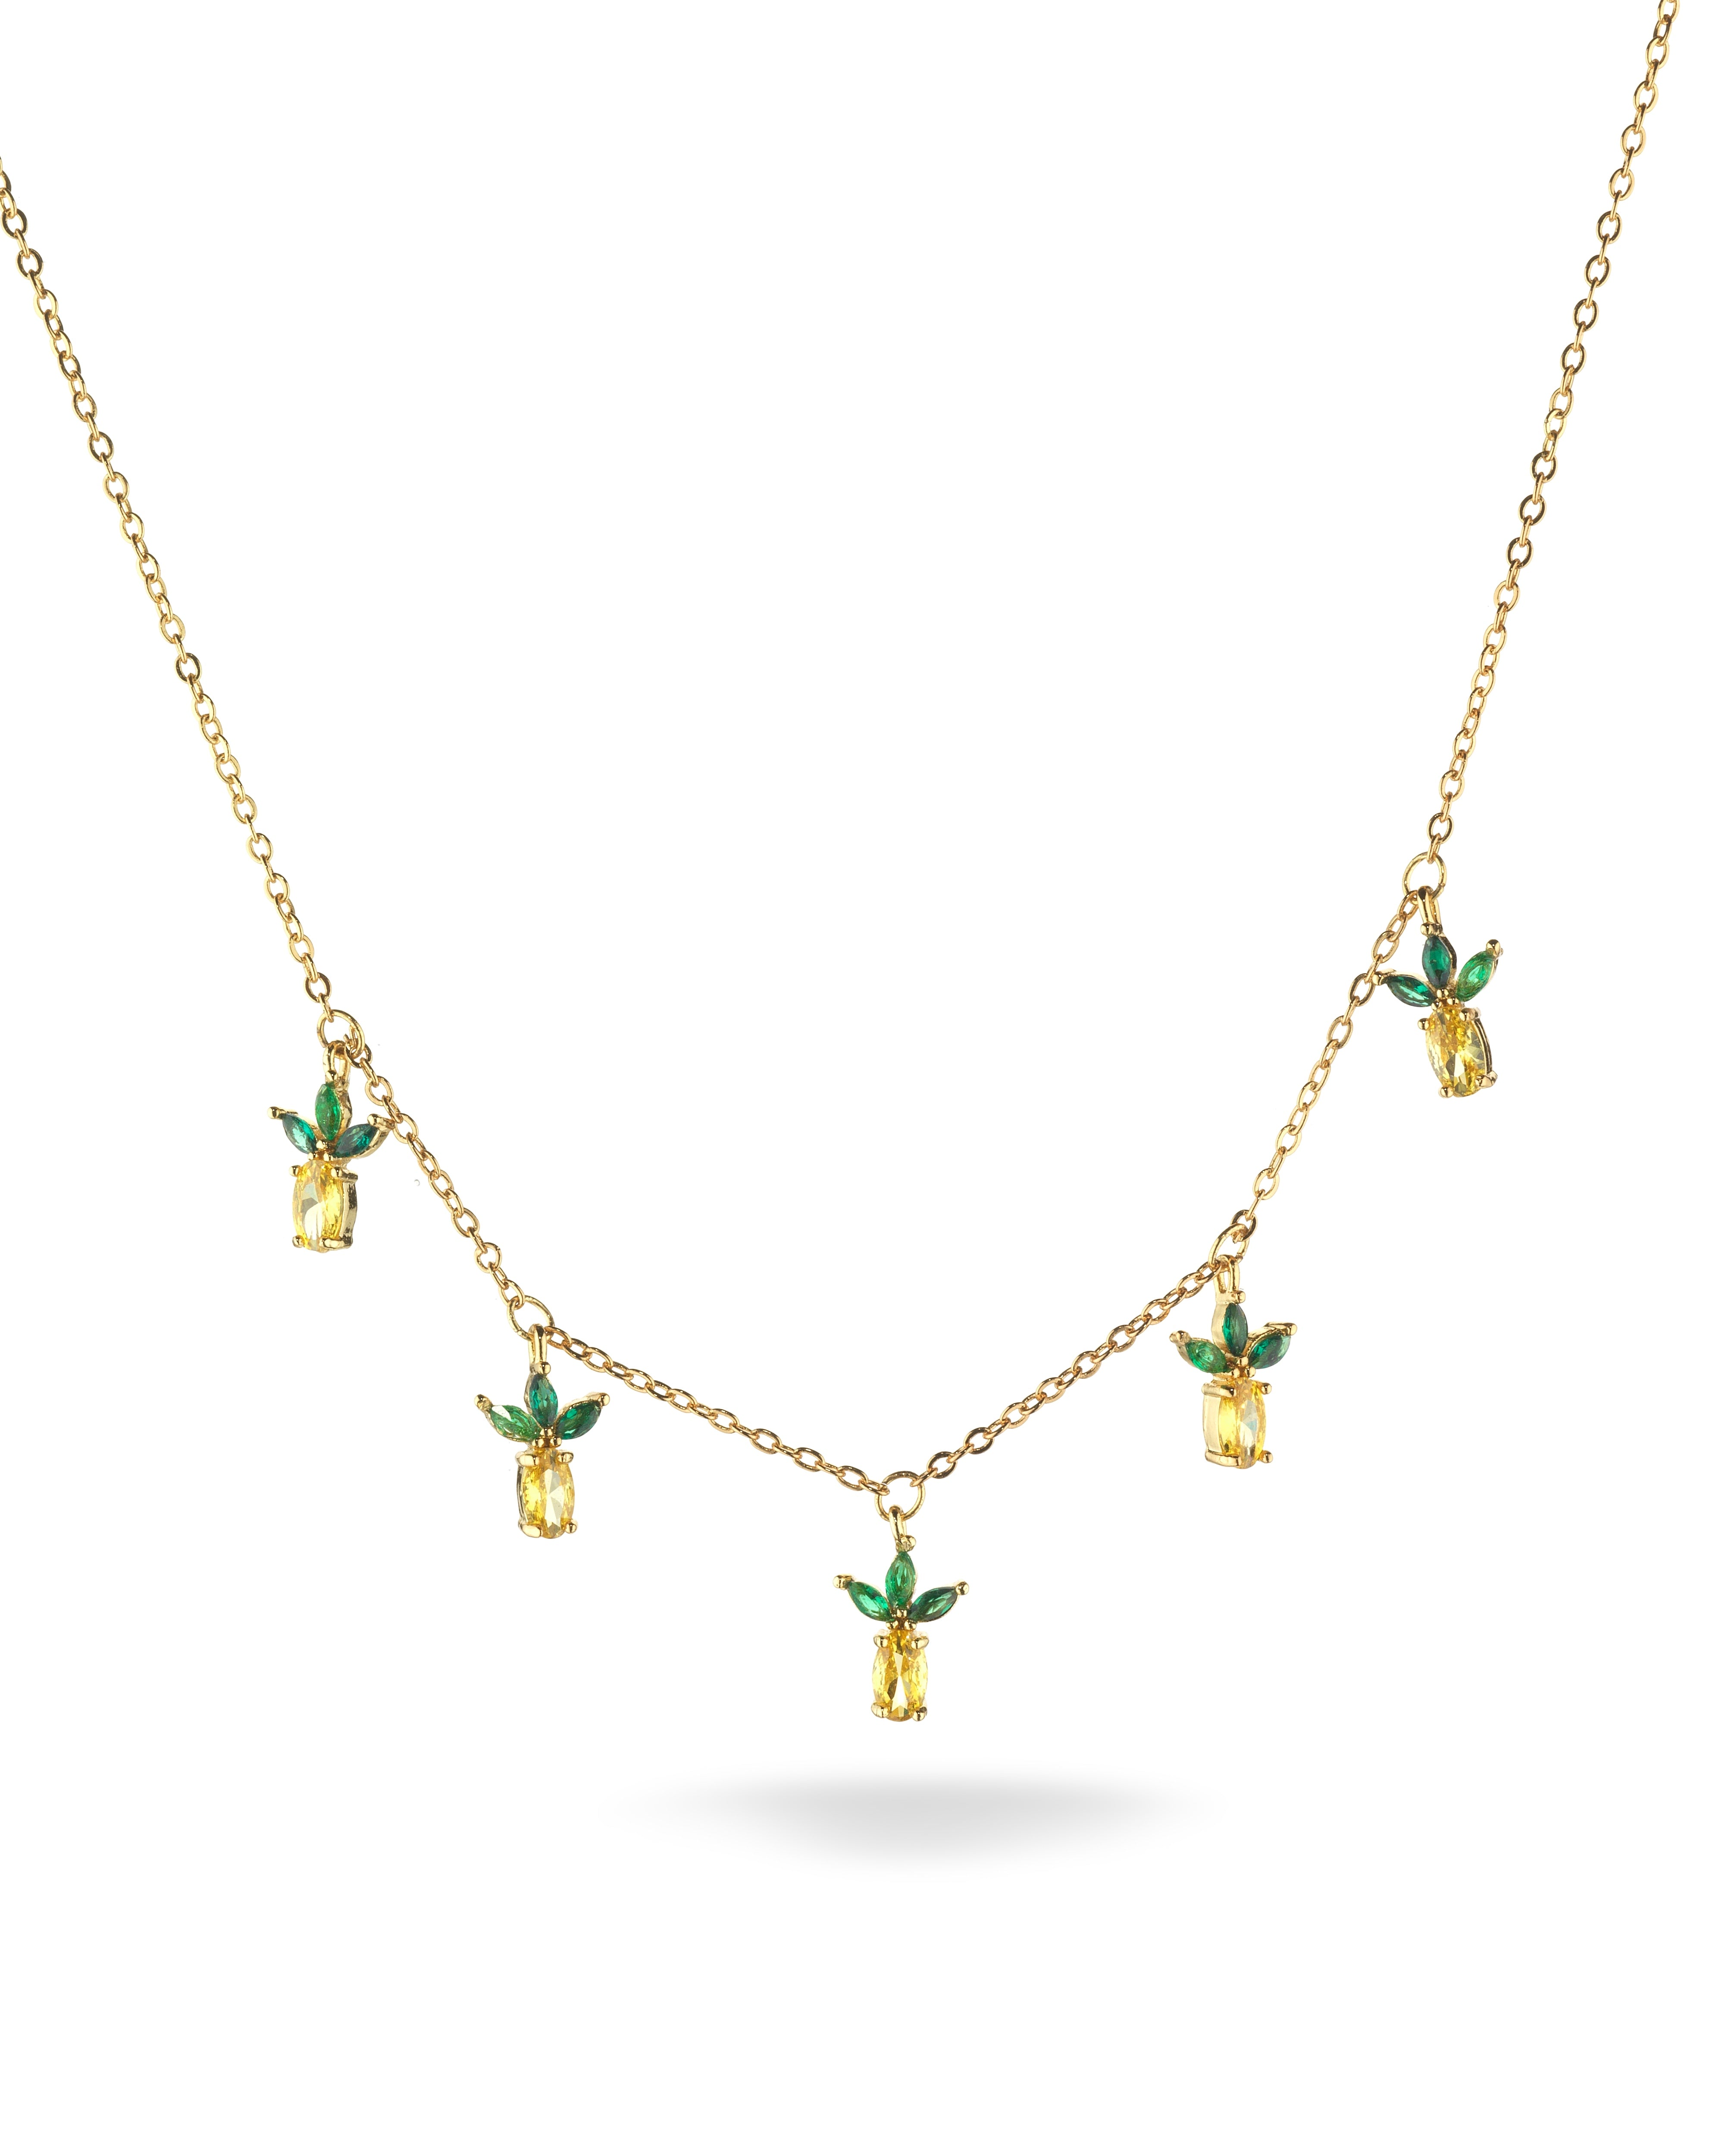 Pineapple charms necklace